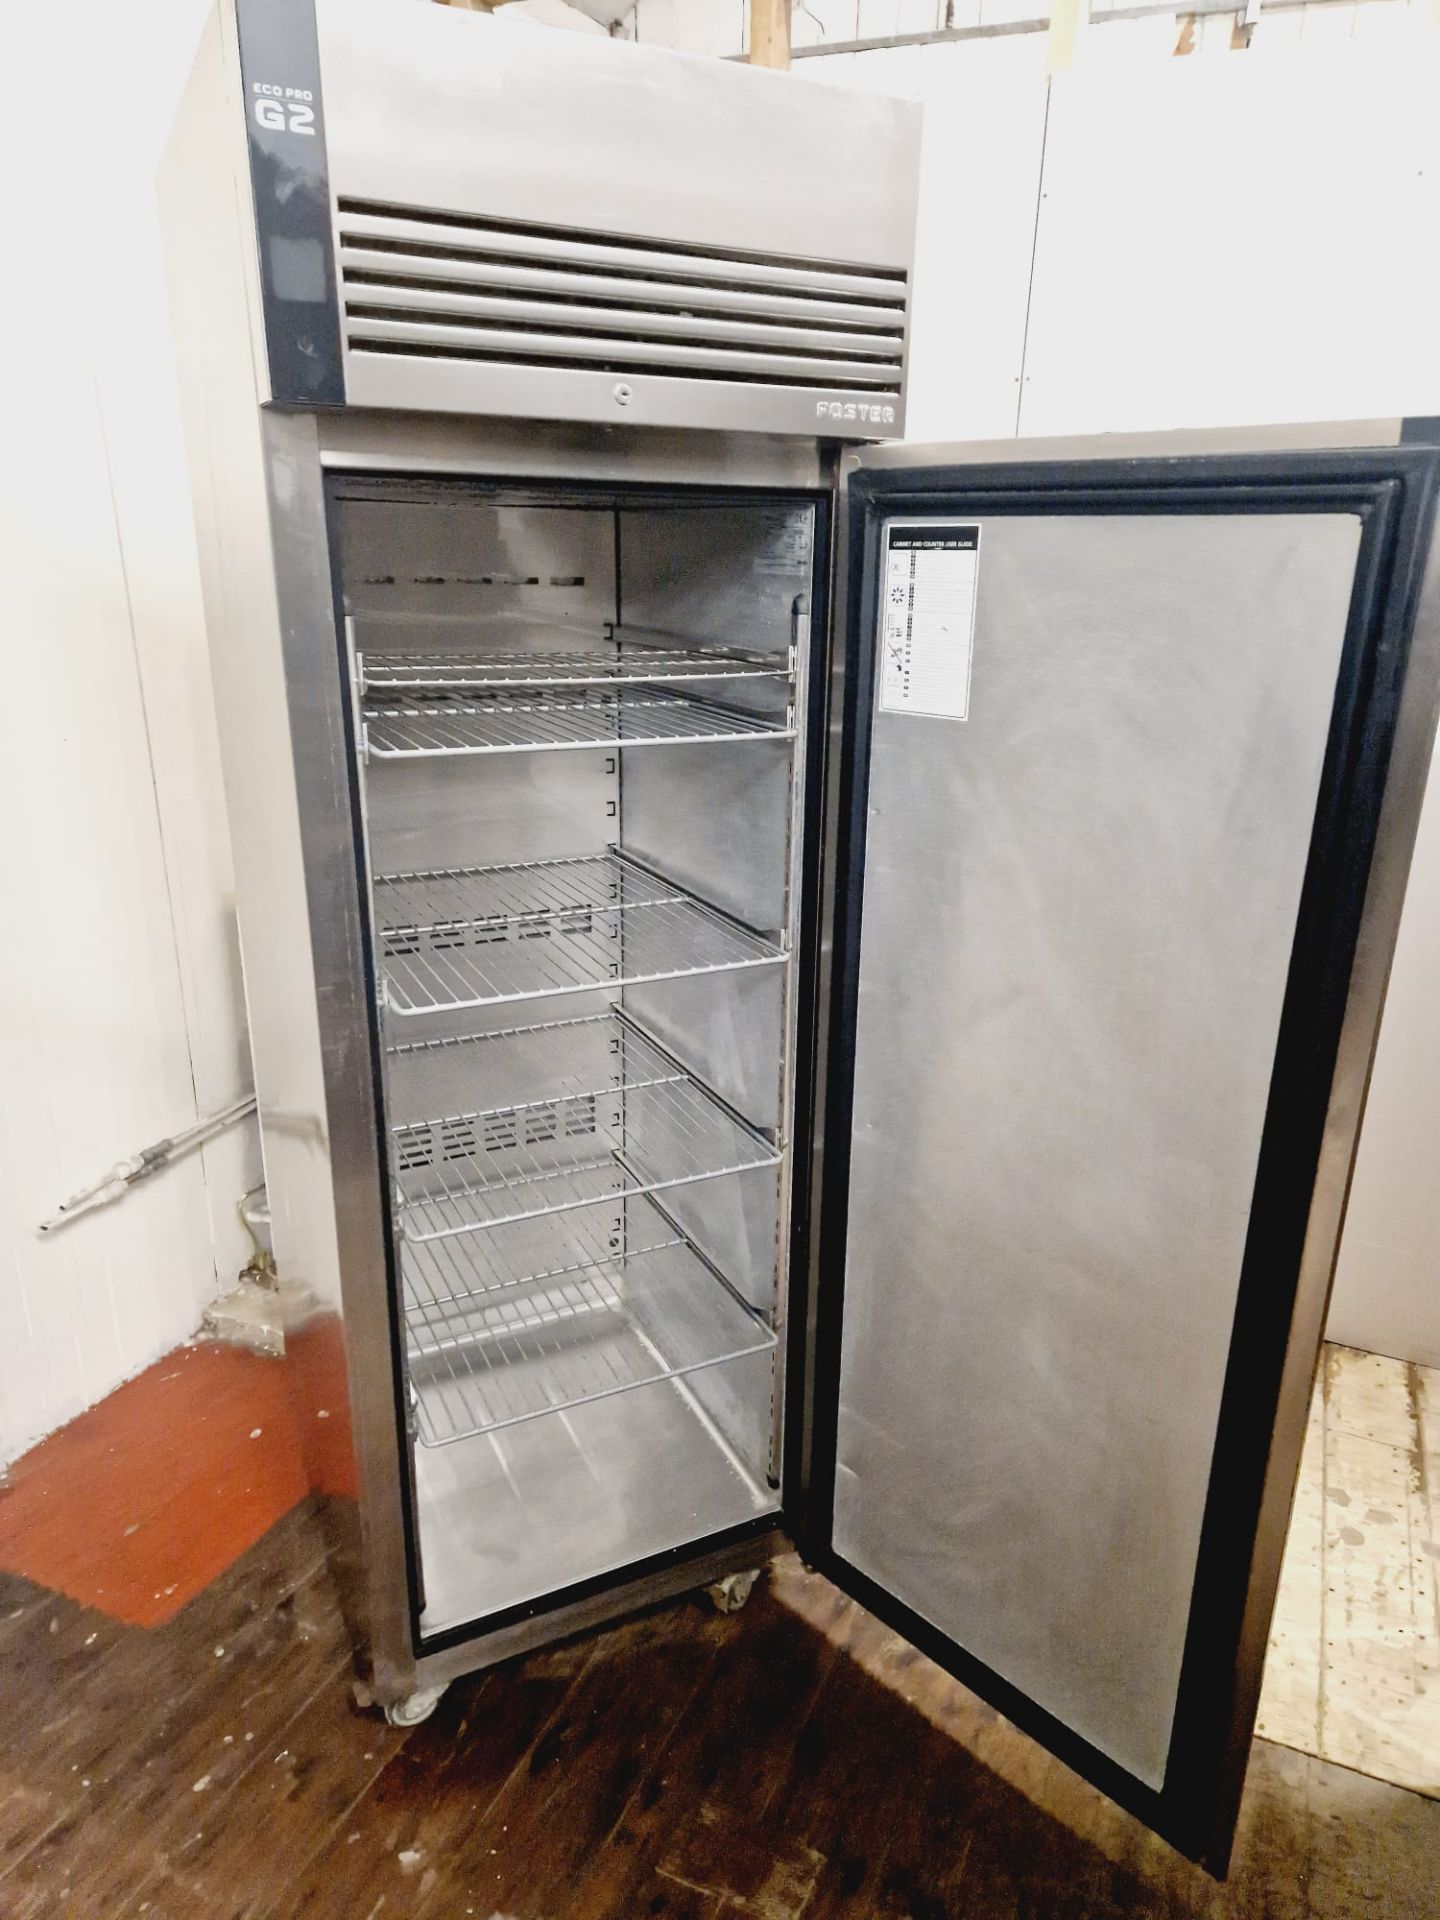 FOSTER G2 UPRIGHT FRIDGE +1 +4 - 600 LITRE - STAINLESS STEEL - FULLY WORKING AND SERVICED - Bild 2 aus 3